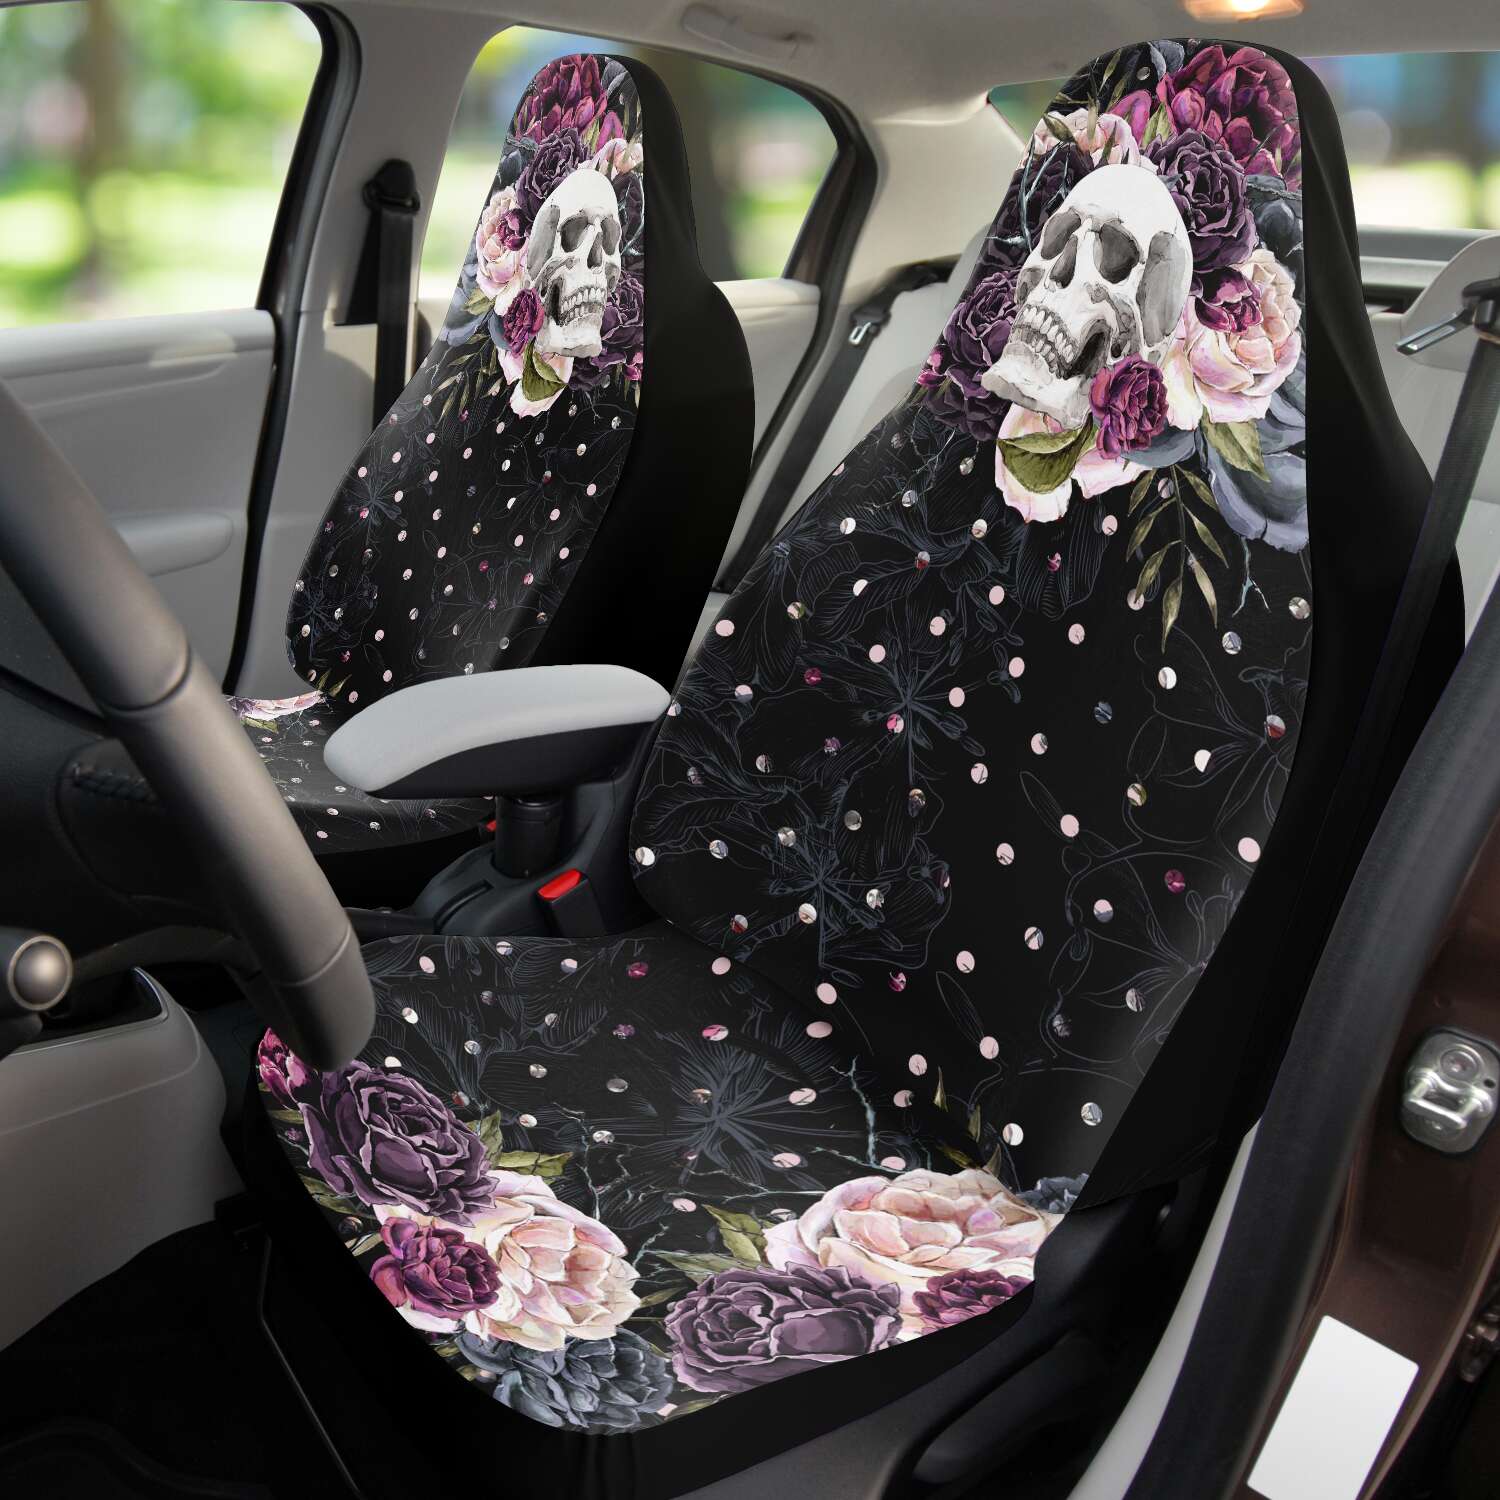 Flower Skull And Polka Dot Bouquet Car Seat Cover Set